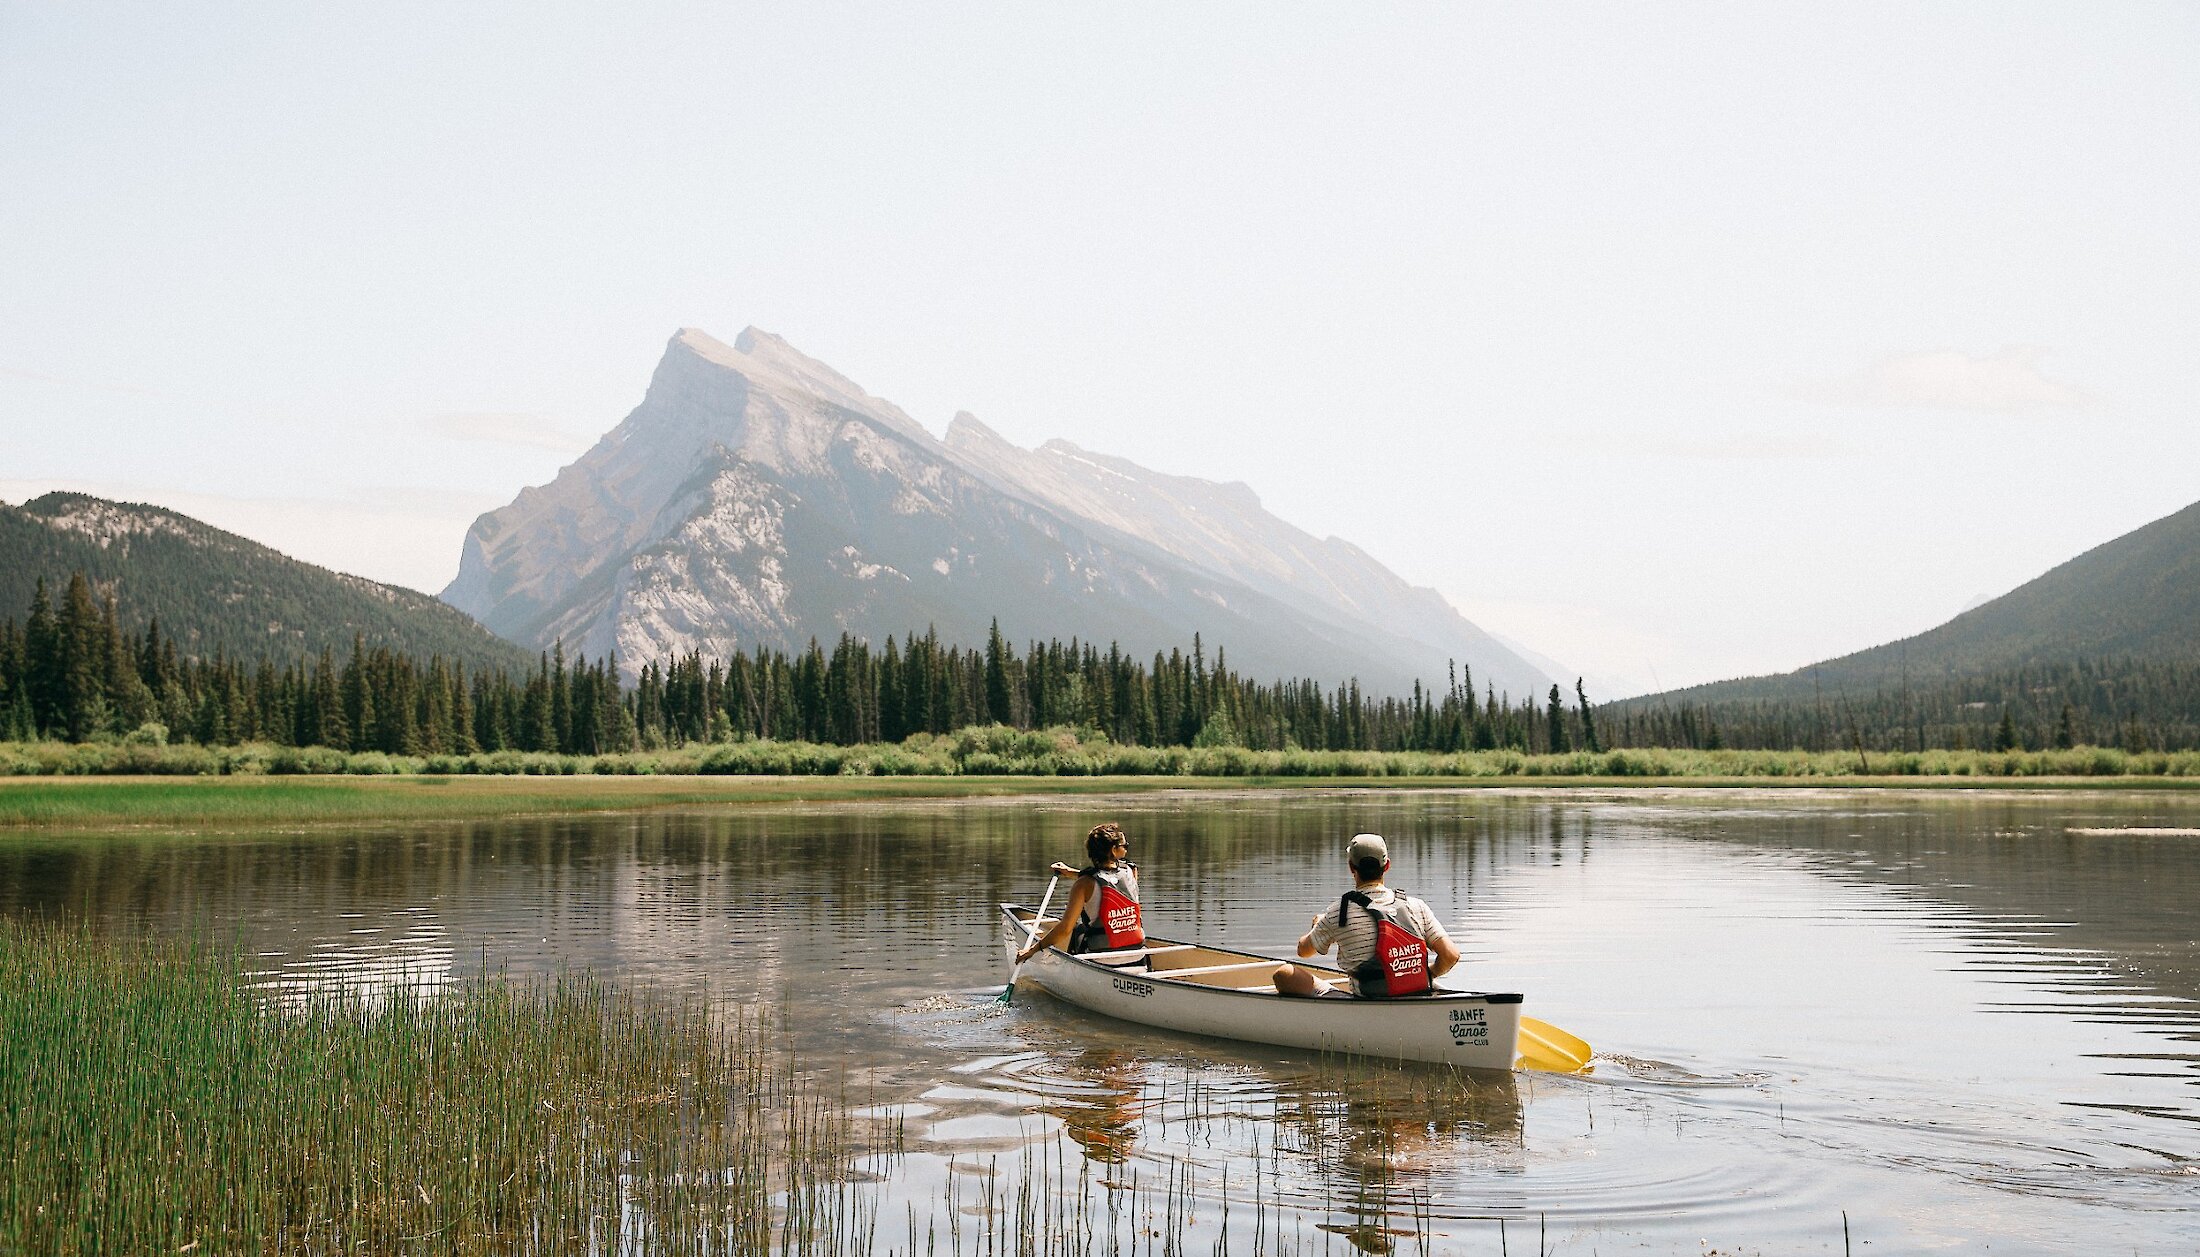 Canoeing in the beautiful Vermilian Lake with views of Mount Rundle